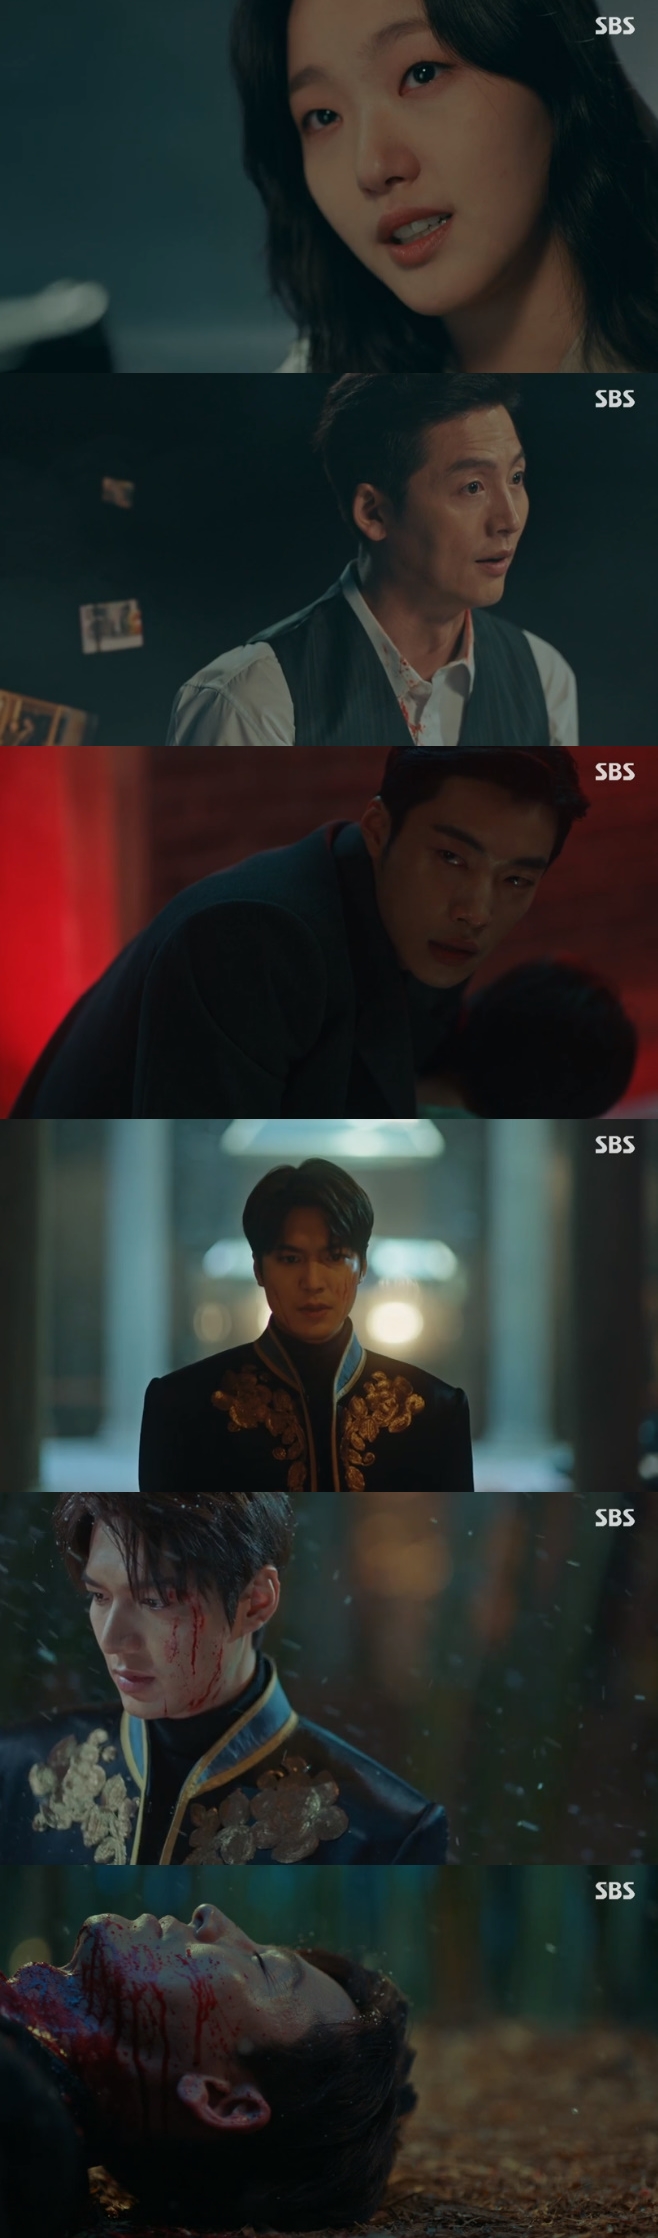 The King Lee Min-ho and Kim Go-eun have become love beyond time and space.In the final episode of SBS gilt drama The King: The Monarch of Eternity (playplayed by Kim Eun-sook and director Baek Sang-hoon, hereinafter, The King), which aired on the night of the 12th, Lee Min-ho returned 25 years ago and succeeded in killing Lee Jung-jin, and the images of South Korea and Korean Empire were drawn.Lee Min-ho, Joyoung (Udohwan) and Kim Go-eun returned to Korean Empire 25 years ago for different reasons.Lee tried to stop Lee Jung-jins rebellion even after abandoning his life, and Joyoung tried to save him.In order to make the operation of Igon to the end, Irim was locked in a gap between the dimensions.Jung Tae-eun walked through the gap between the two dimensions with a broken piece of the man-pa-sik, and Irim asked, So what are you going to do now?Until he stops you from the past, and then he returns the world. And if he fails, I will stop you.If Igon saves the world, all the memories about Igon will disappear, but it is okay. Jung Tae-eun said, There is nothing flowing here, I can not shoot. He pointed the gun at the rim, saying, If no one has shot yet, I do not know.Among them, the operation of Igon and Joyoung began, but the past began to change without being divided into half by the young Igon.Irim was able to get a non-split universalism, and Joyoung was shot and unconscious to save a young man.Lee was concerned about such Joyoung, but he chased it to the end to remove it.Eventually, Igons operation succeeded, and Igon beheaded Irim with his sword, and time began to pass through the gap between the two at the same time as Irim died.So Jung Tae-eun pulled the trigger toward Lee-rim, who ran toward him, and killed the current Lee-rim.The death of Irim made many changes: Igon of South Korea, Jihoon could not lose his life by Irim, and Kang Shin-jae could remain in their own world.And Jeong Tae-eul returned to South Korea in 2020, and after that, Jeong Tae-eul lived a daily life without Lee Rim and Kang Shin-jae, and tried not to forget Lee Gon.At the same time, Igon tried to find a stable state by crossing various parallel worlds.Among them, Igon met Jeong Tae-eun with various occupations such as soldiers, actors, and navy, and finally was able to arrive in South Korea where he was still alive.I did not see at a glance that the person in front of me was a frequent person, and he said, I looked happy everywhere, so it was one thing, but you seem to know me.I think I am remembering everything, and Jung Tae-eun said, Why are you so late? I waited every day. I had to cut back the enemy and bring Young back, and I had to find the way again, and it took a long time to open the door of the whole universe.I thought I could not remember me even if I found it. I wanted to see you who forgot me. Im sorry. In the end, Jung Tae-eul and Igon were able to freely cross time and space with the completed full-scale and spend everyday life like ordinary lovers.In addition, Cho Eun-seop (Udohwan) succeeded in making love with Ming Nari (Myeong Seung-ah, Kim Yong-ji) and Joyoung.